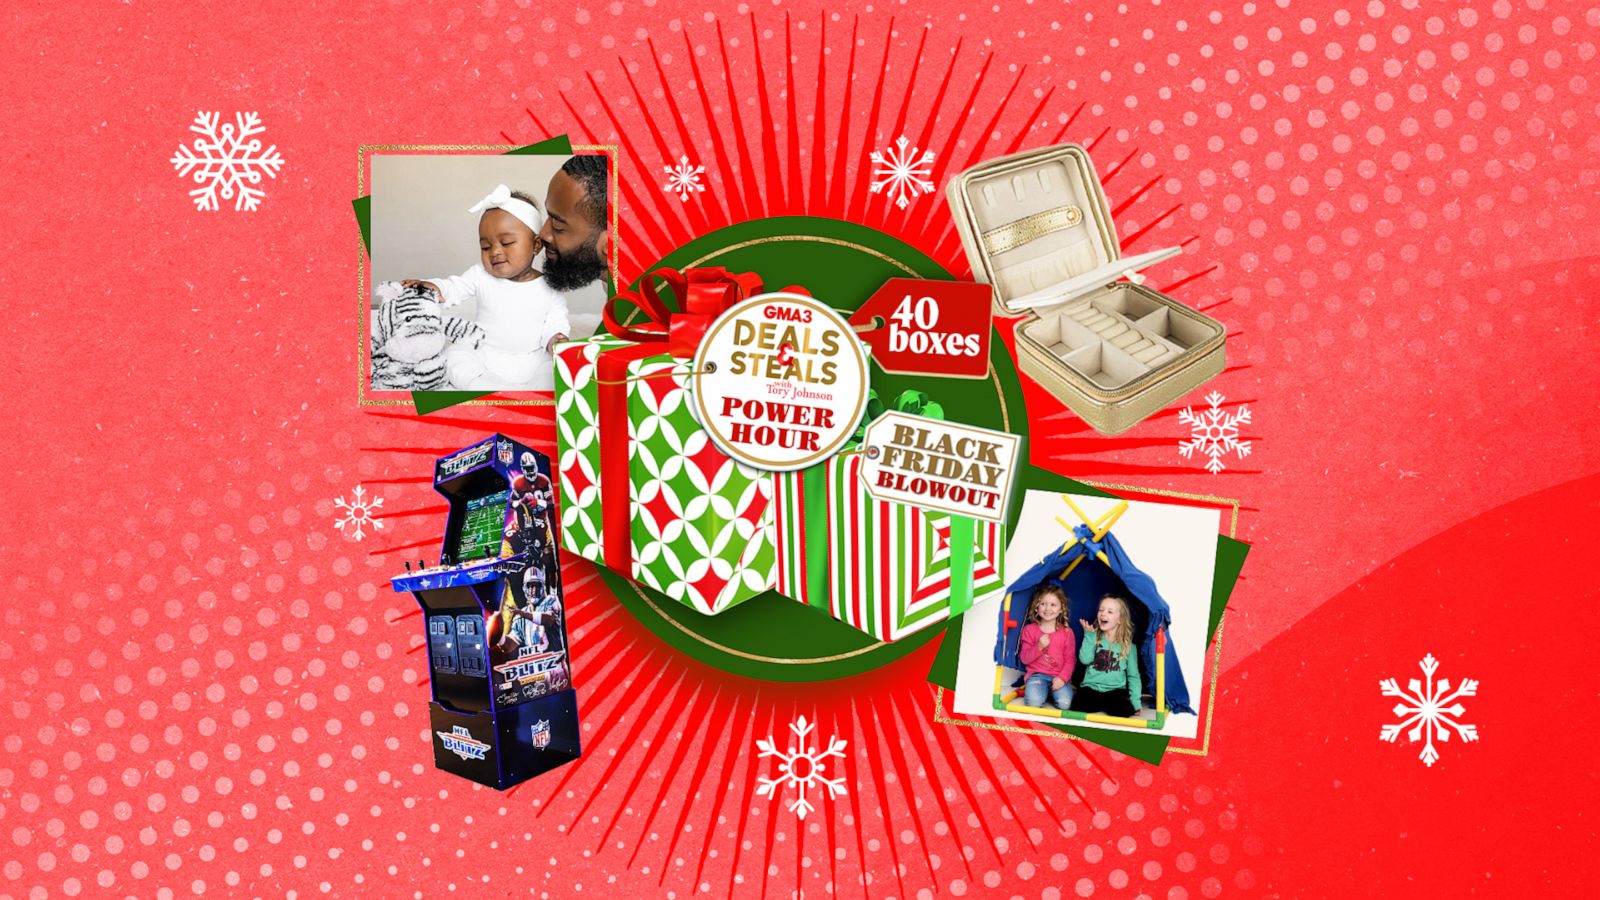 GMA3' Deals & Steals 40 Boxes Holiday Power Hour America